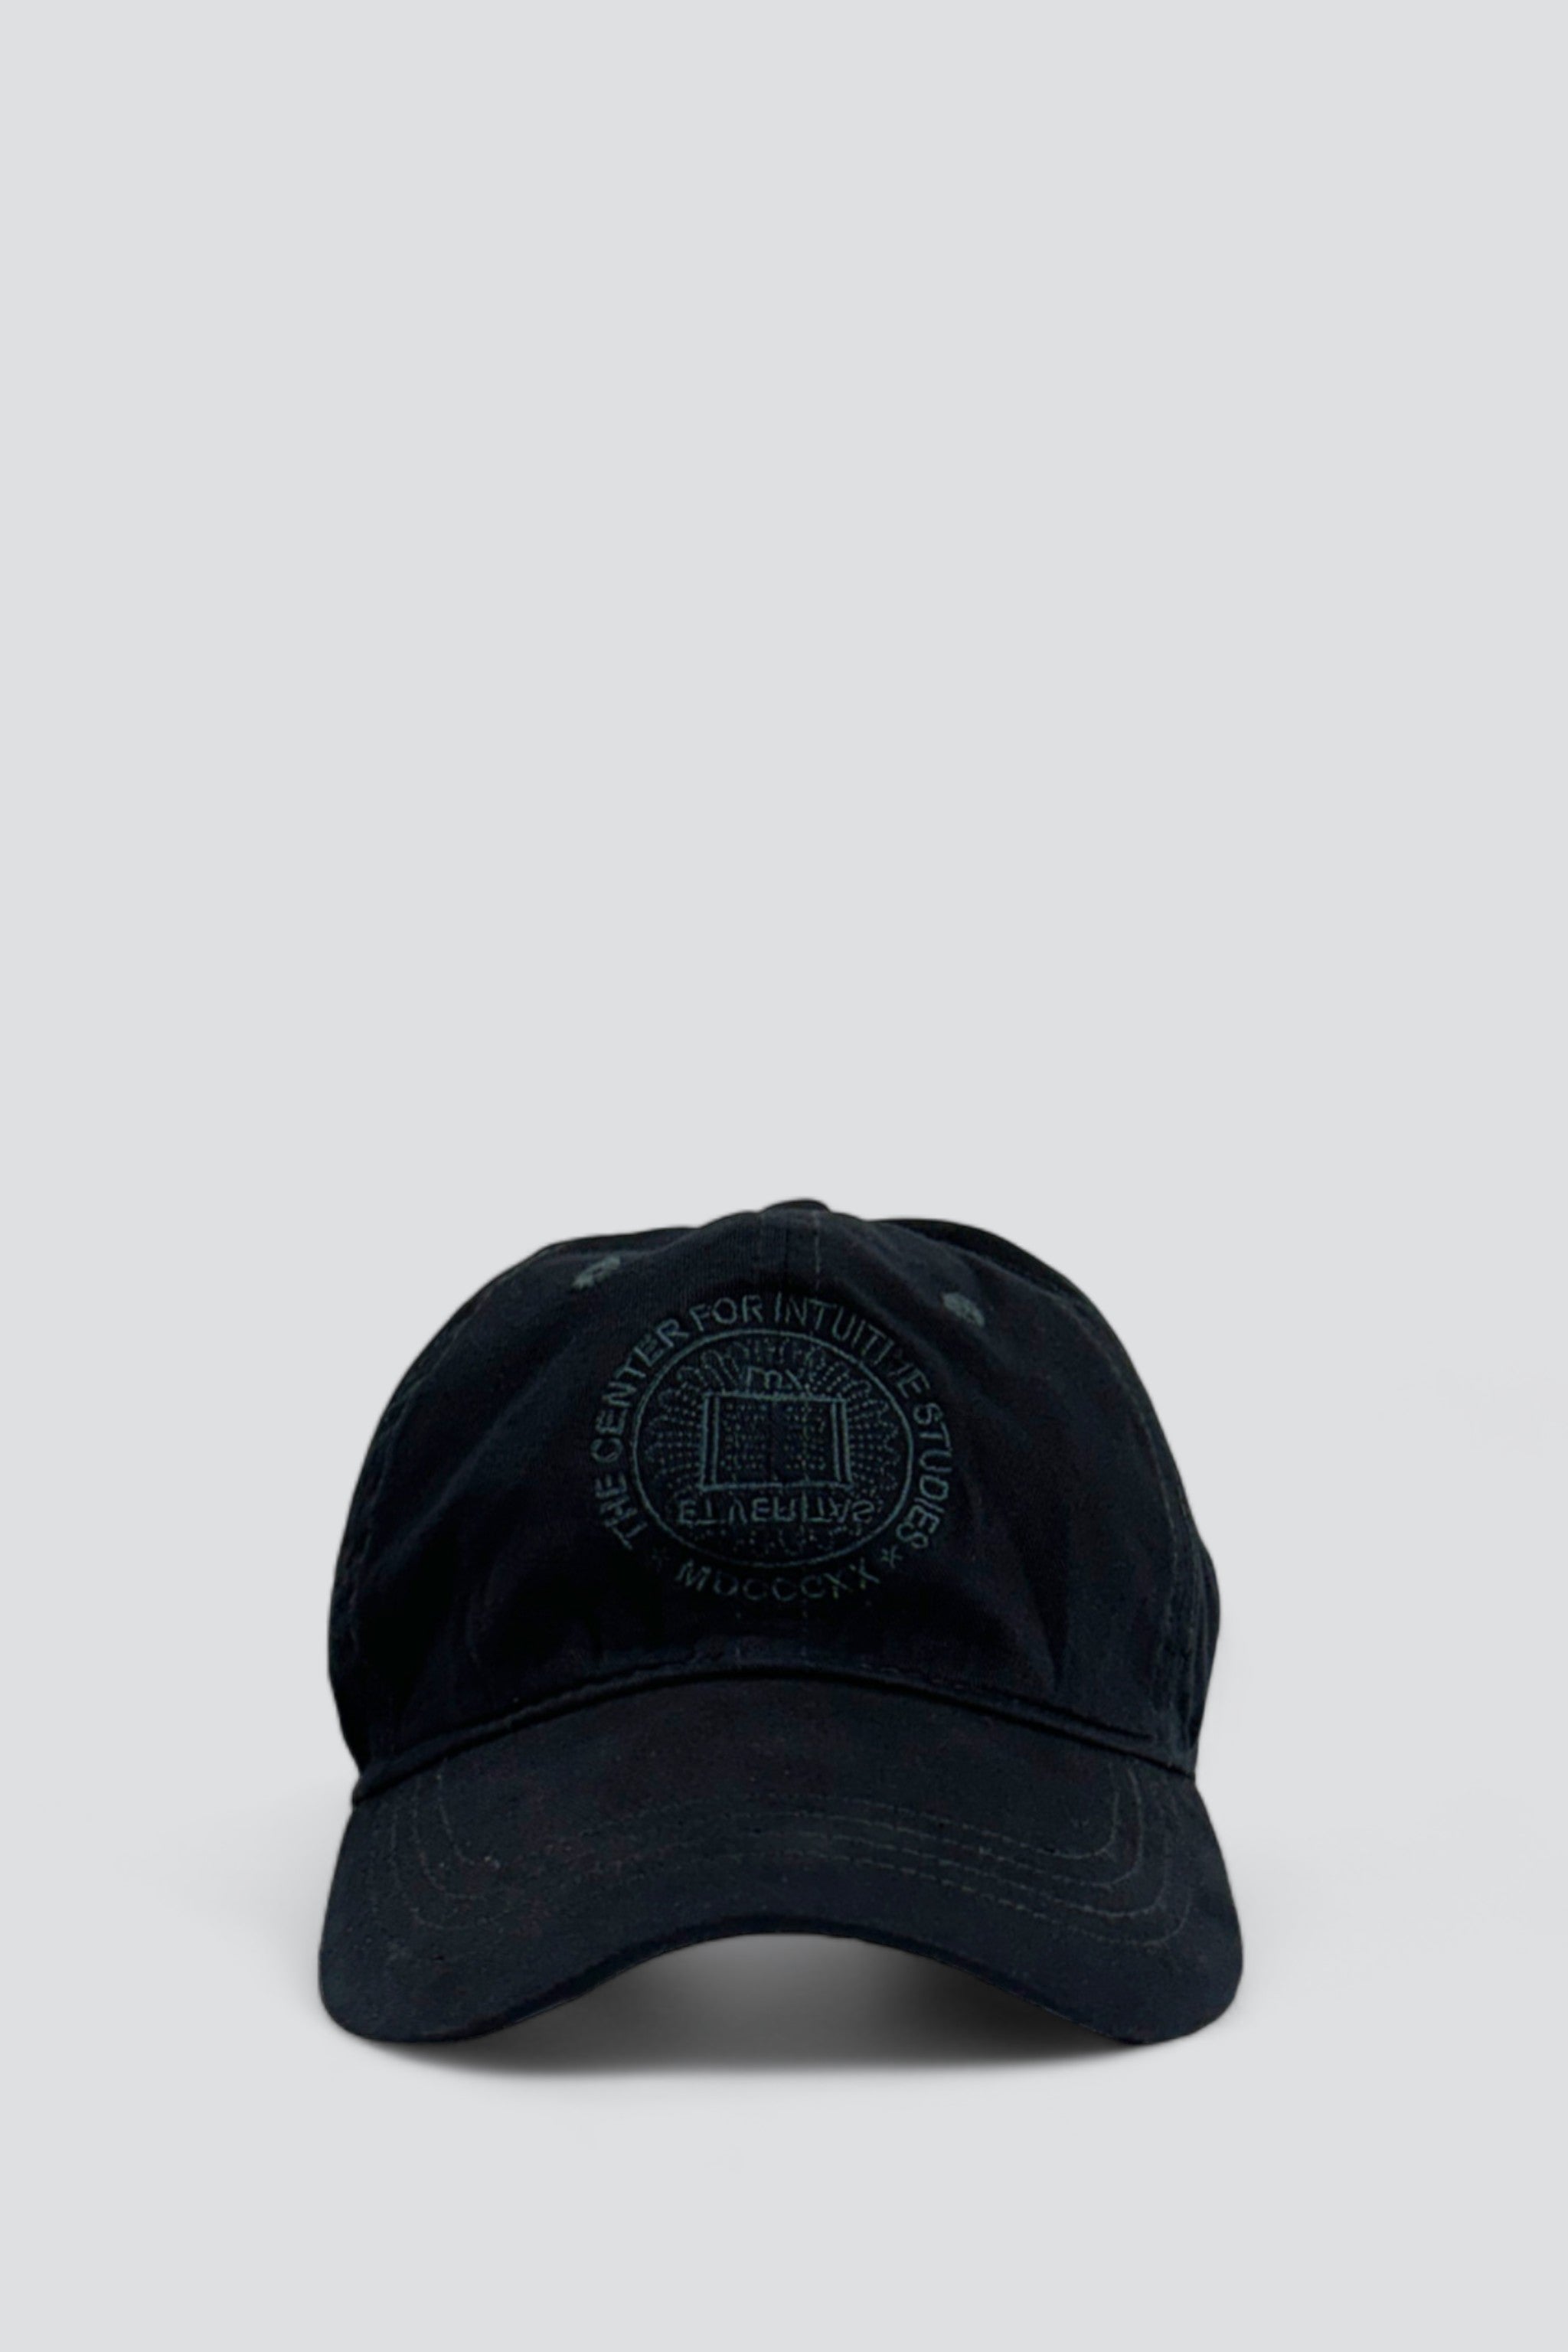 The Center for Intuitive Studies Circle Logo Hat - Overdyed Black